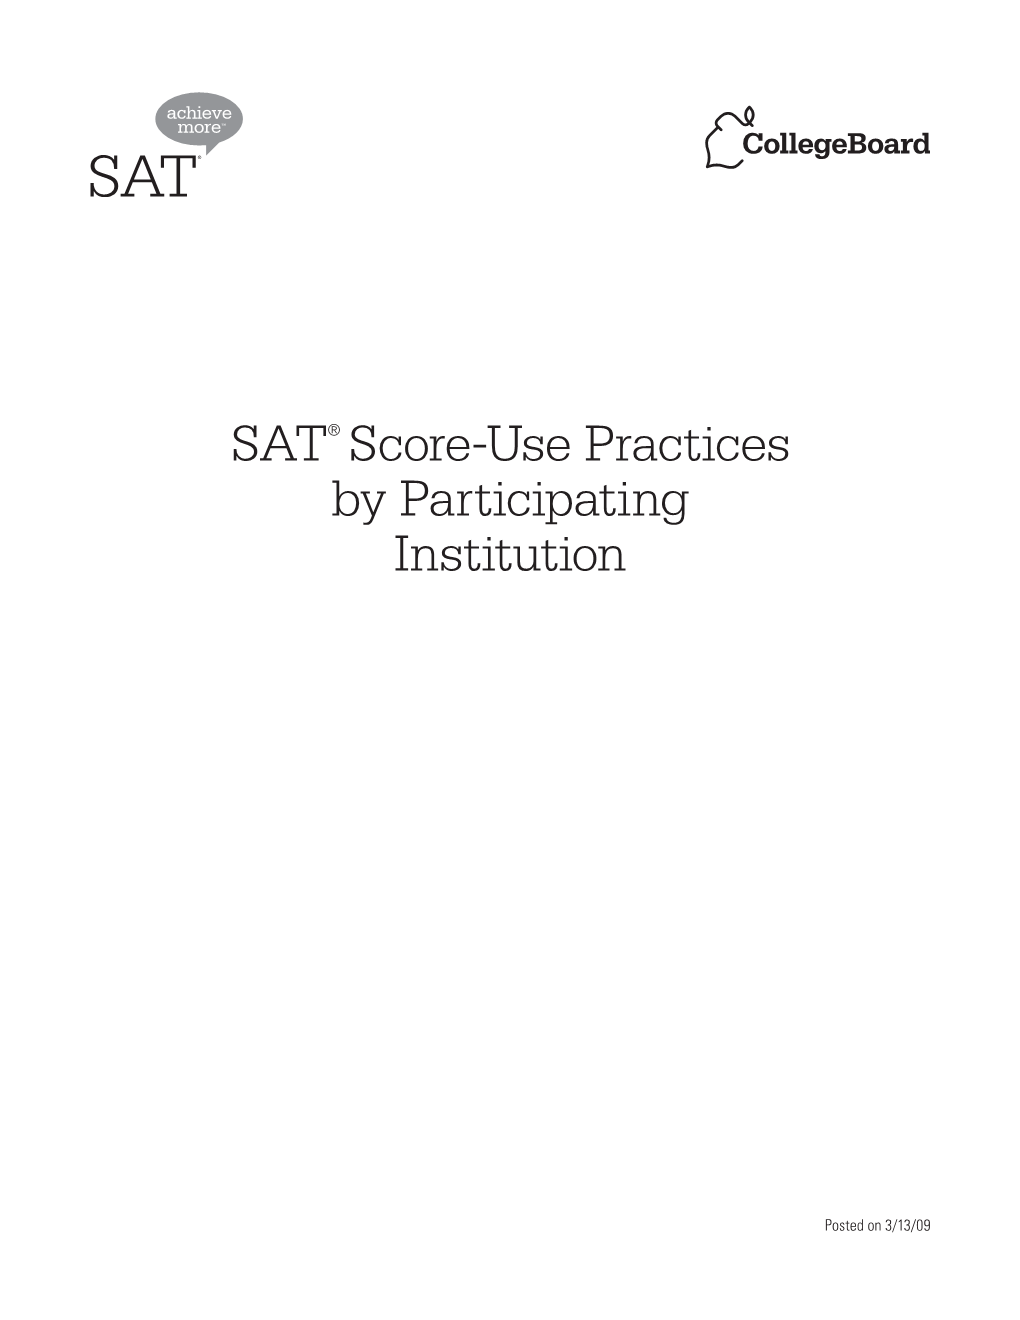 SAT® Score-Use Practices by Participating Institution